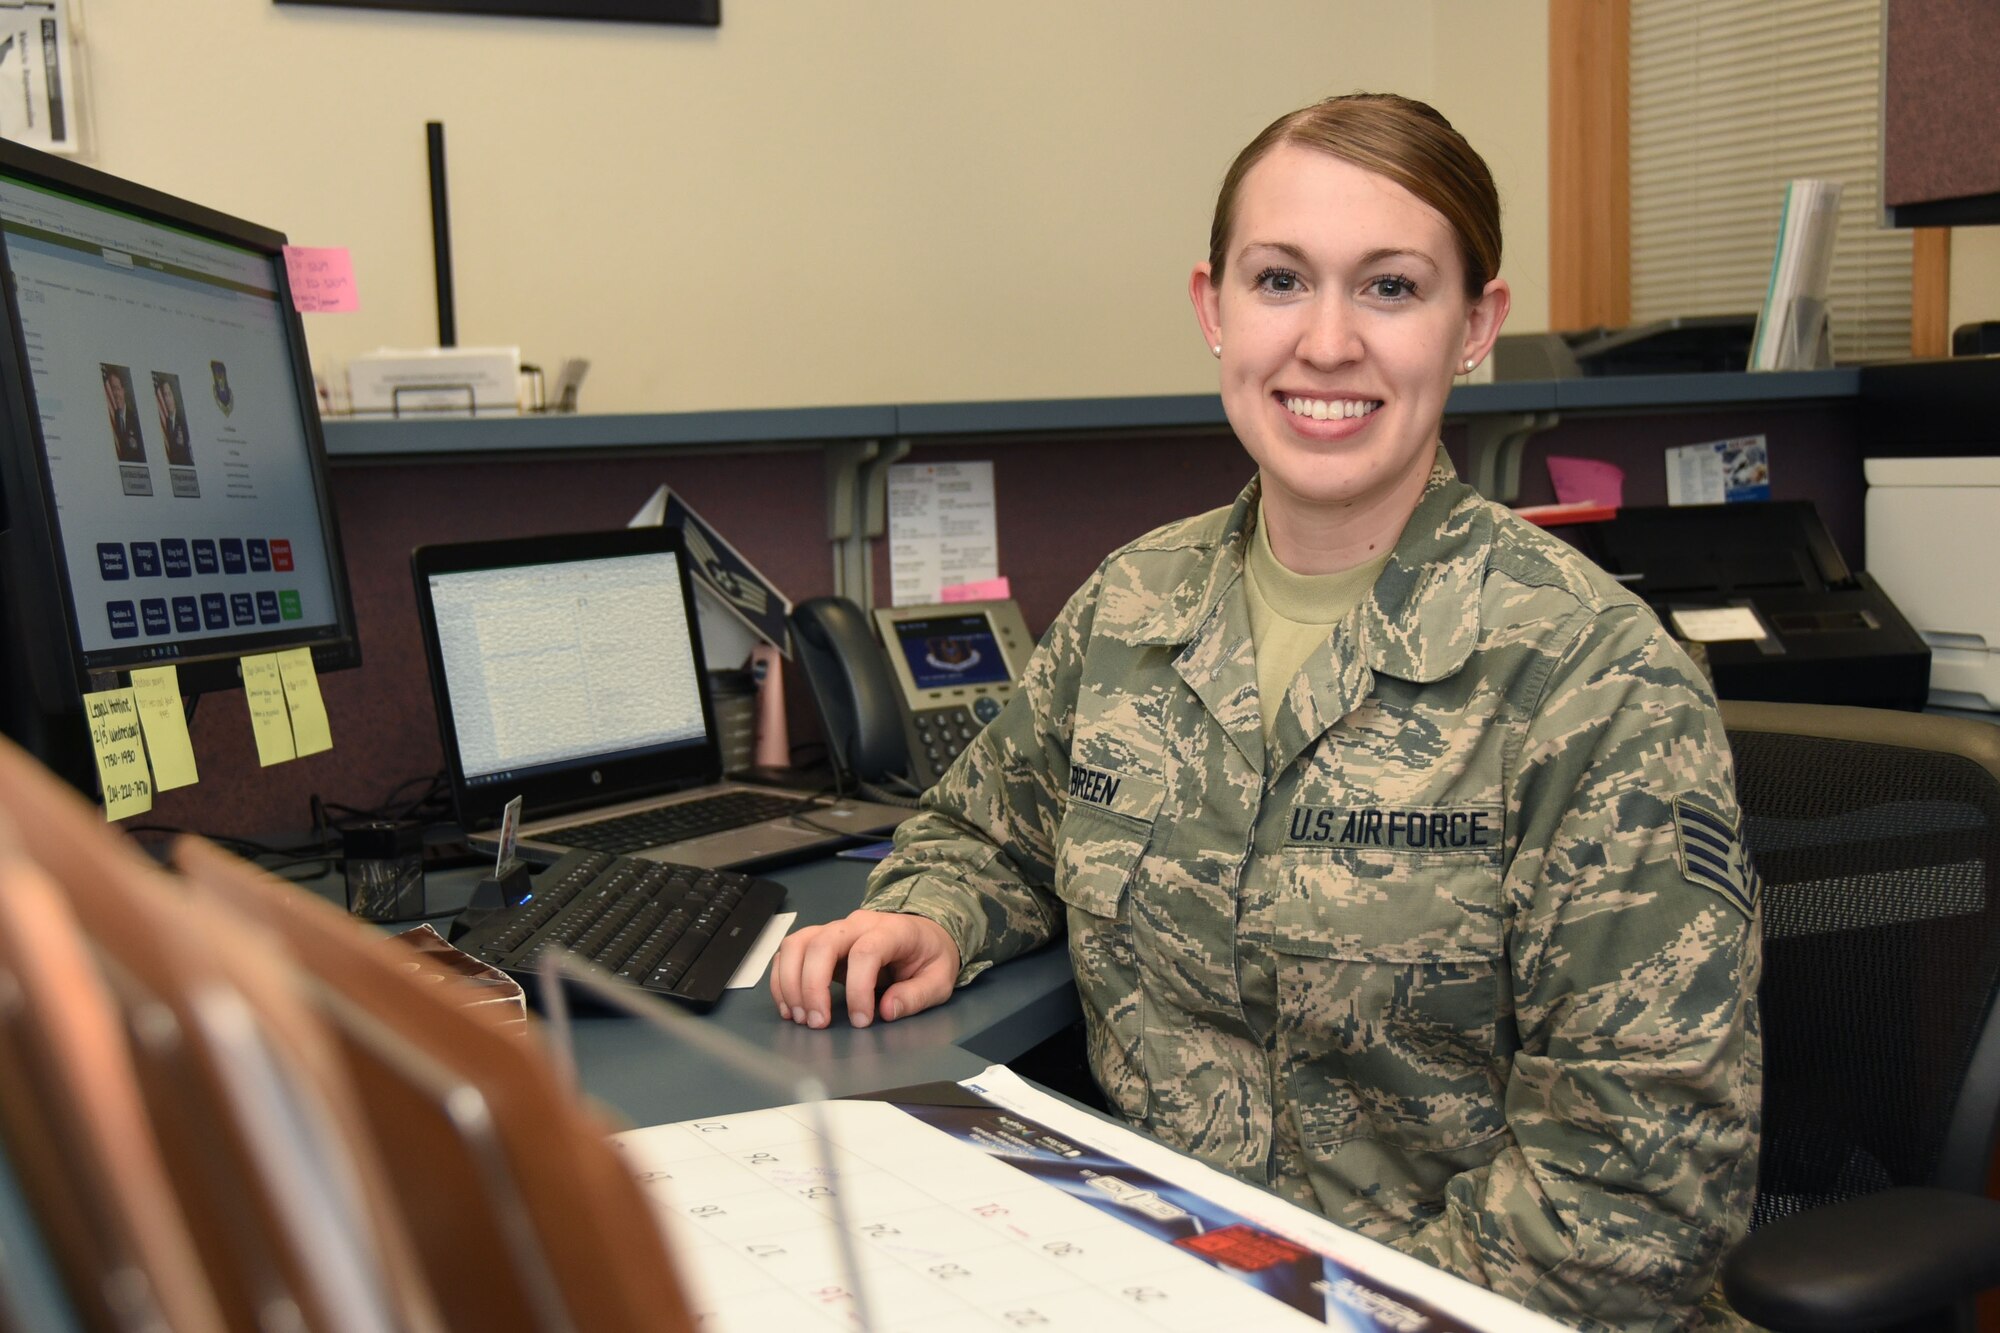 Staff Sgt. Brittany Breen, a 301st Judge Advocate Adverse Actions Paralegal, shares why she joined the military and her career goals during an interview for a Spotlight feature October 11, 2018. The Spotlight series gives a behind-the-scenes look at the men and women who are the driving force of the 301st Fighter Wing.